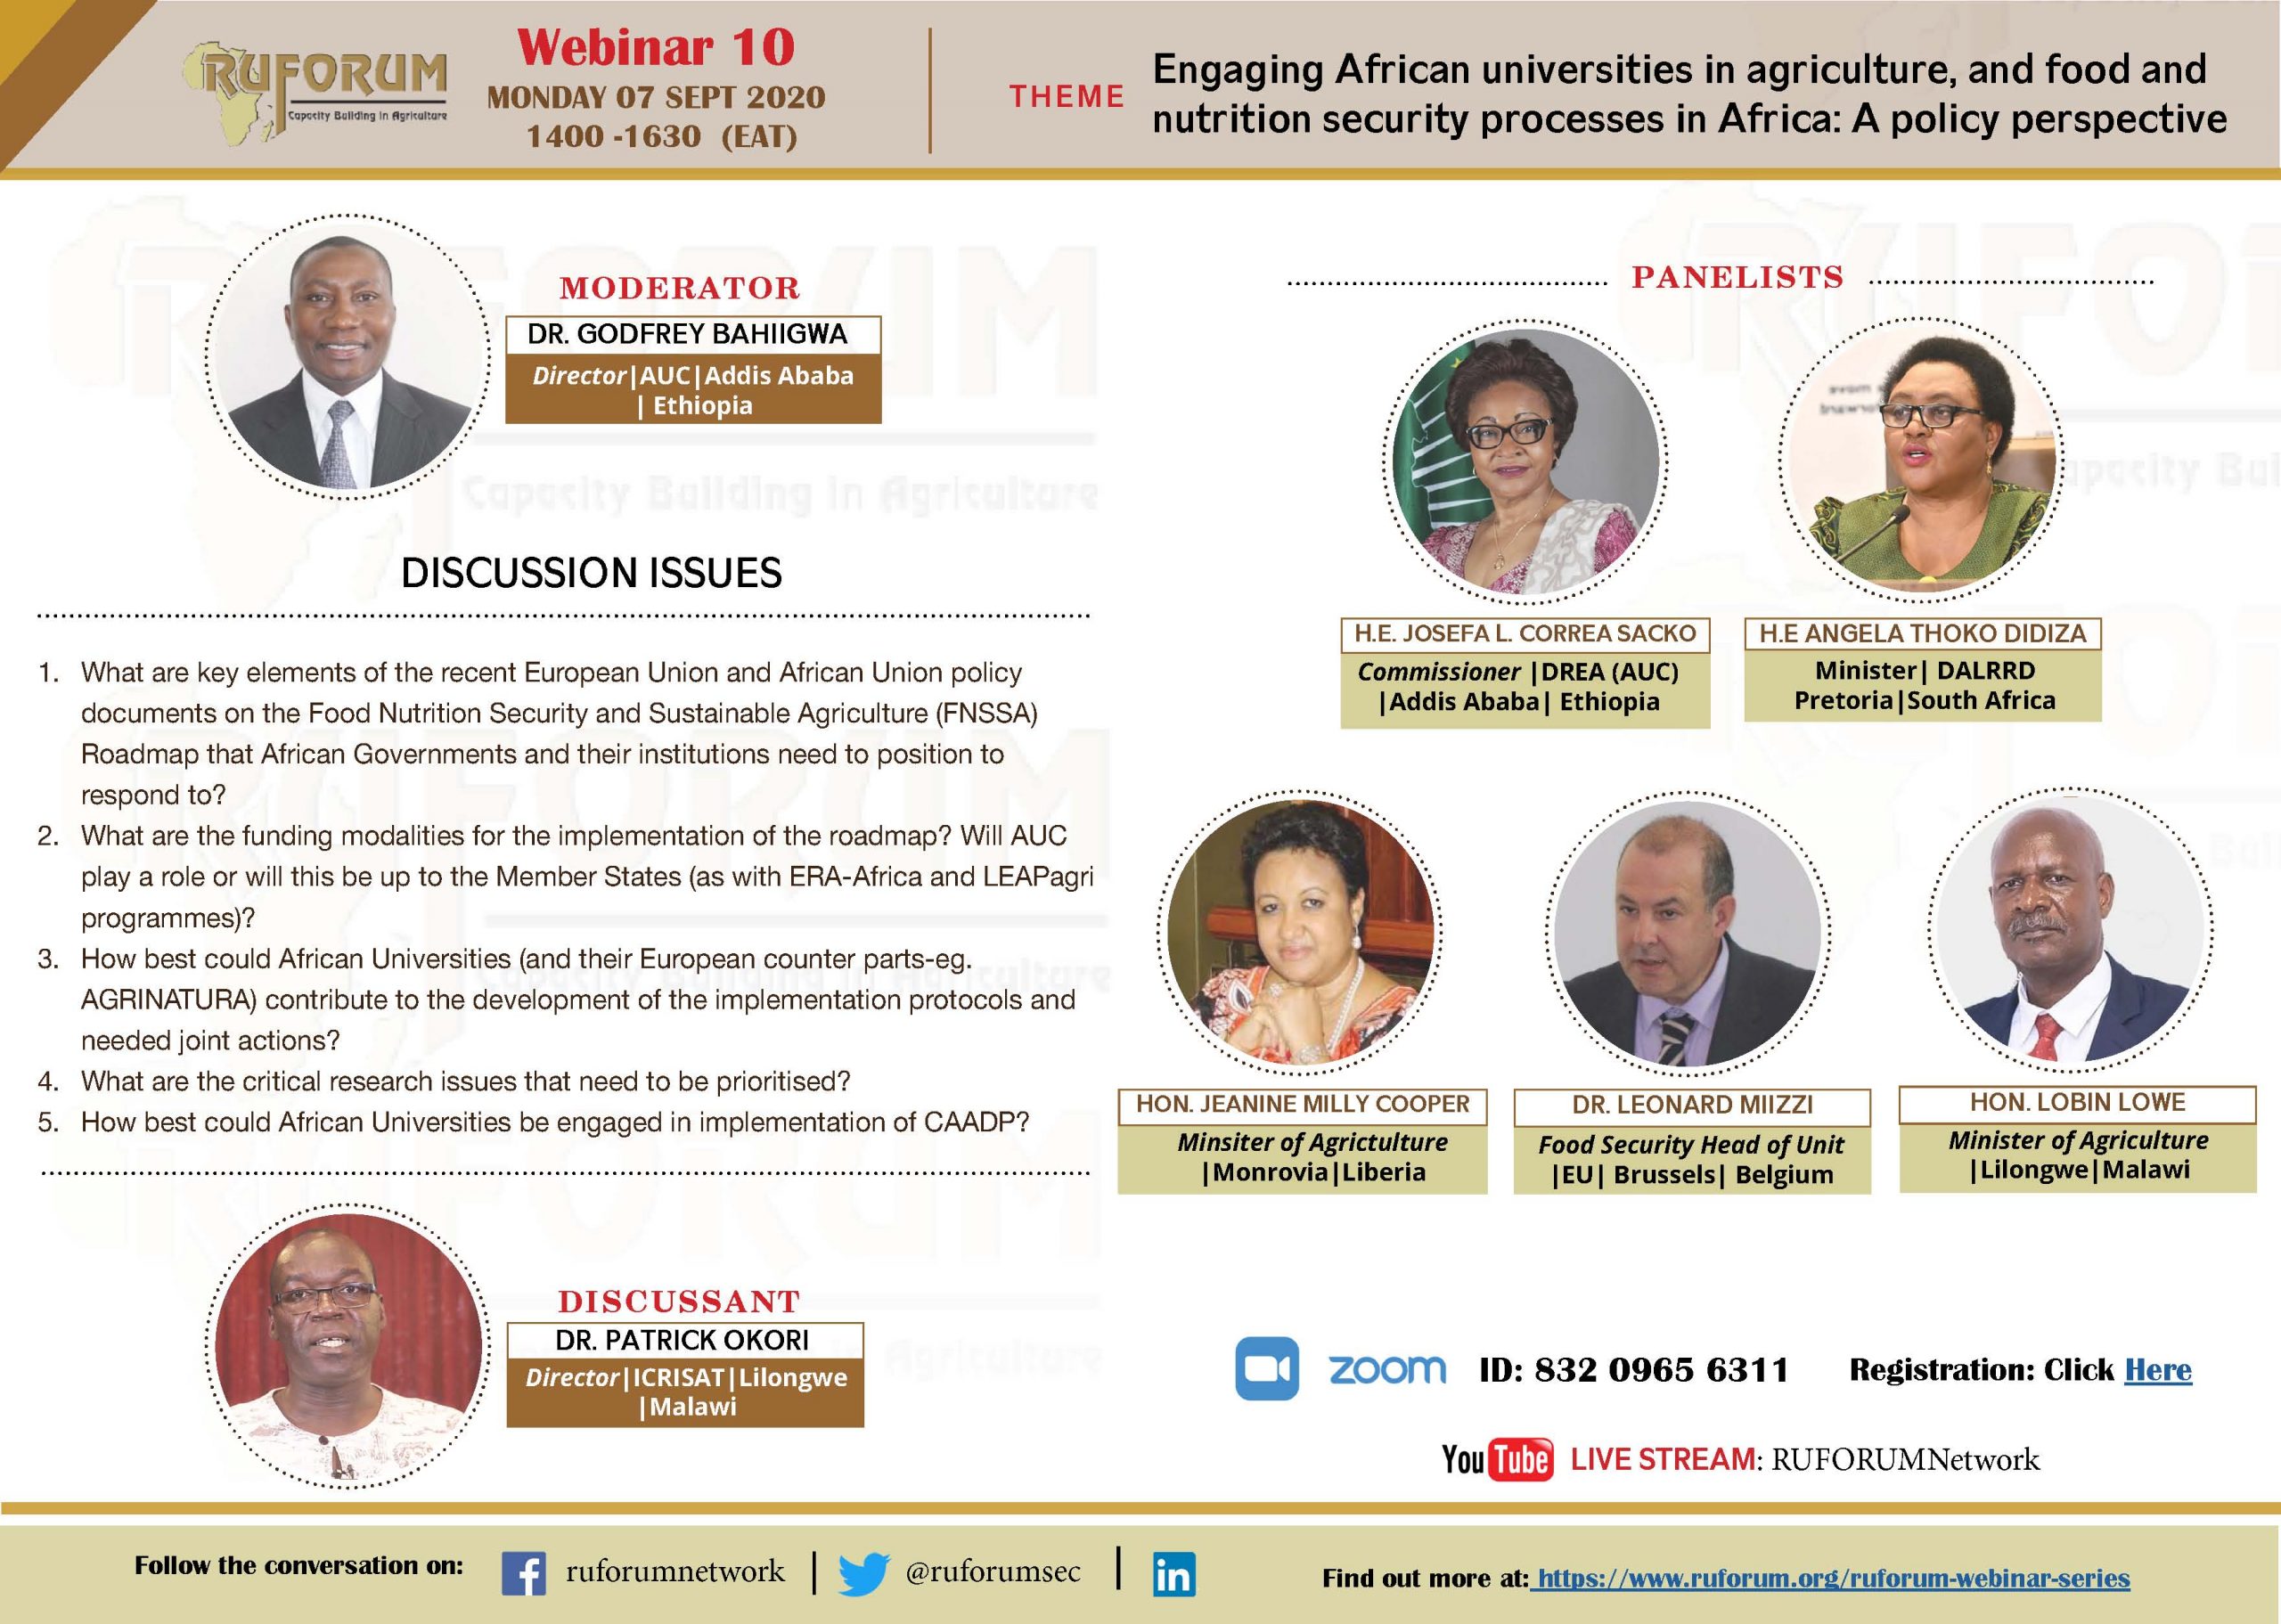 RUFORUM Webinar 10: Policy Perspective-Engaging African Universities in Agriculture, held on 7th September 2020 from 2:00 to 4:30PM EAT